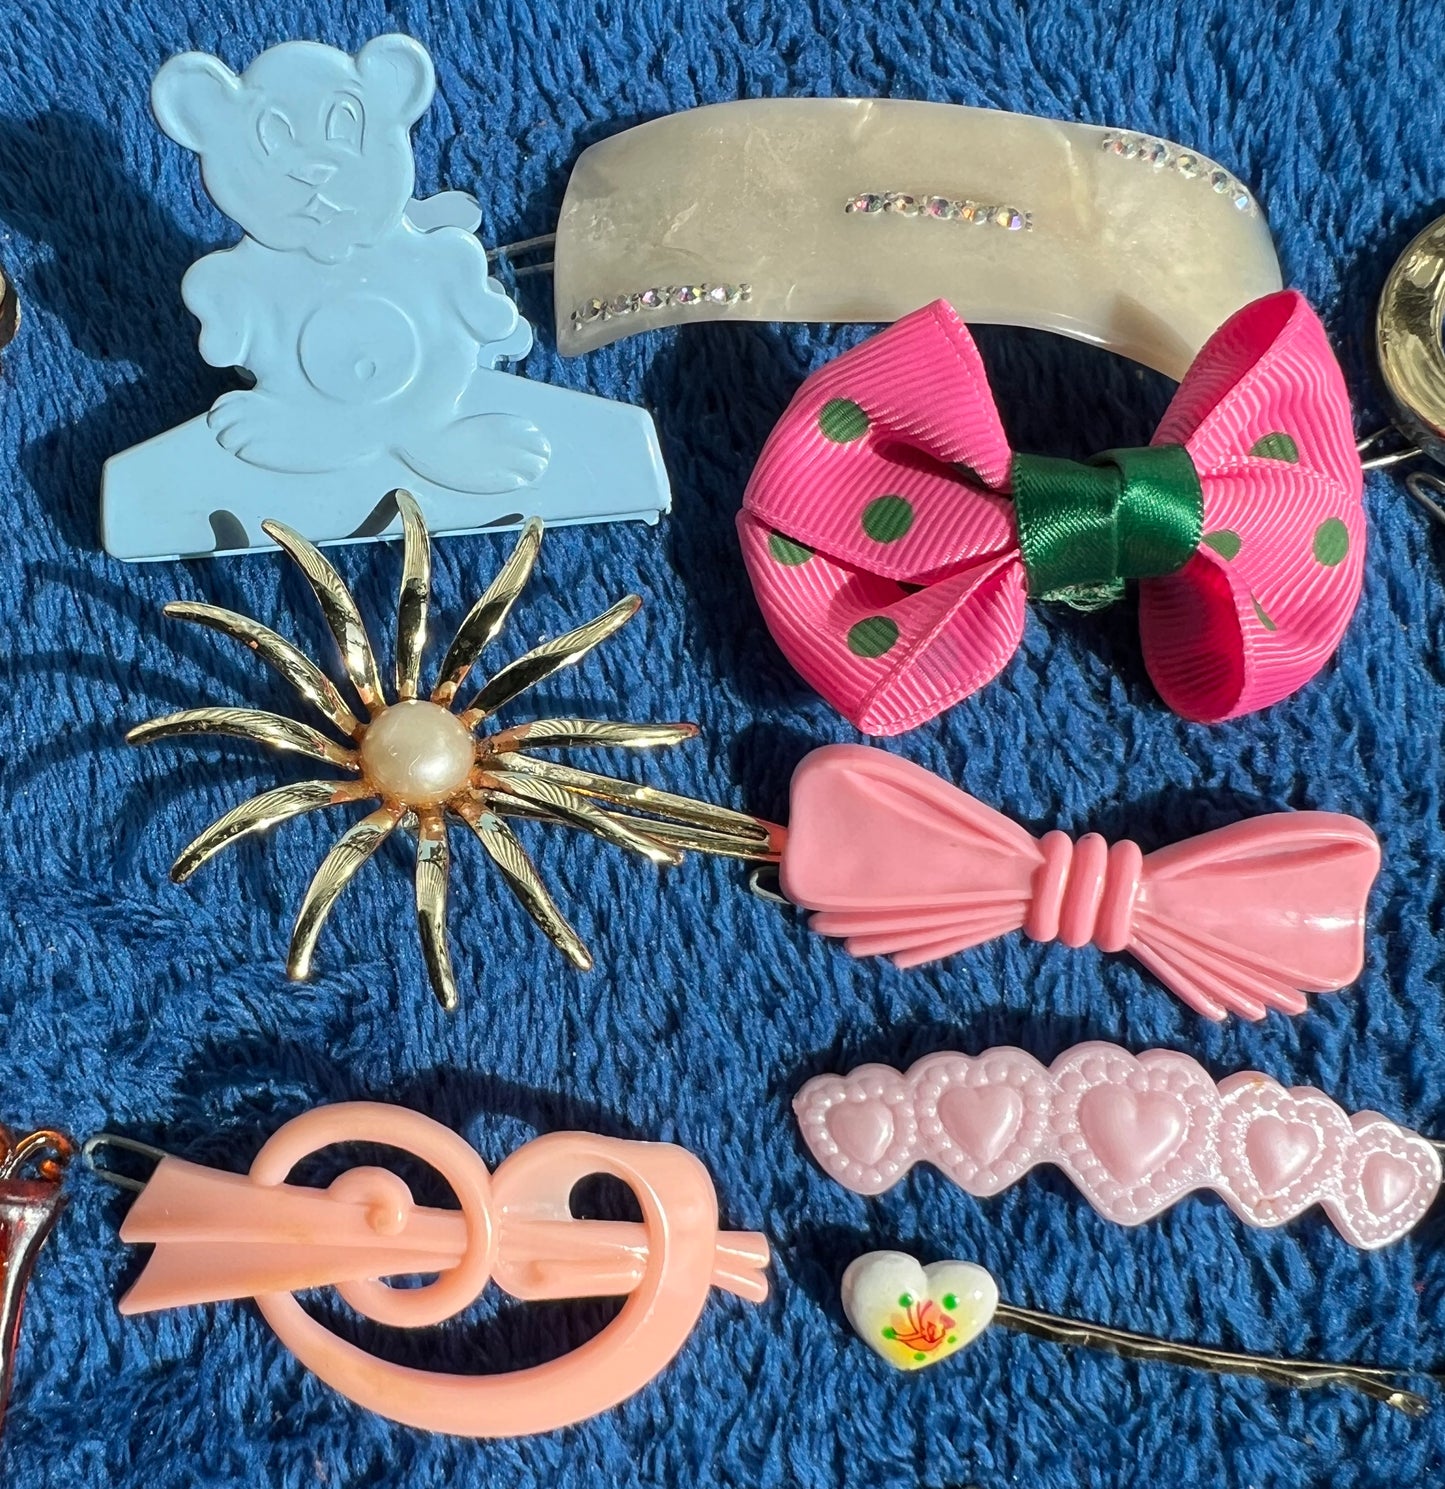 36 Vintage Hair Clips, Combs and Pins